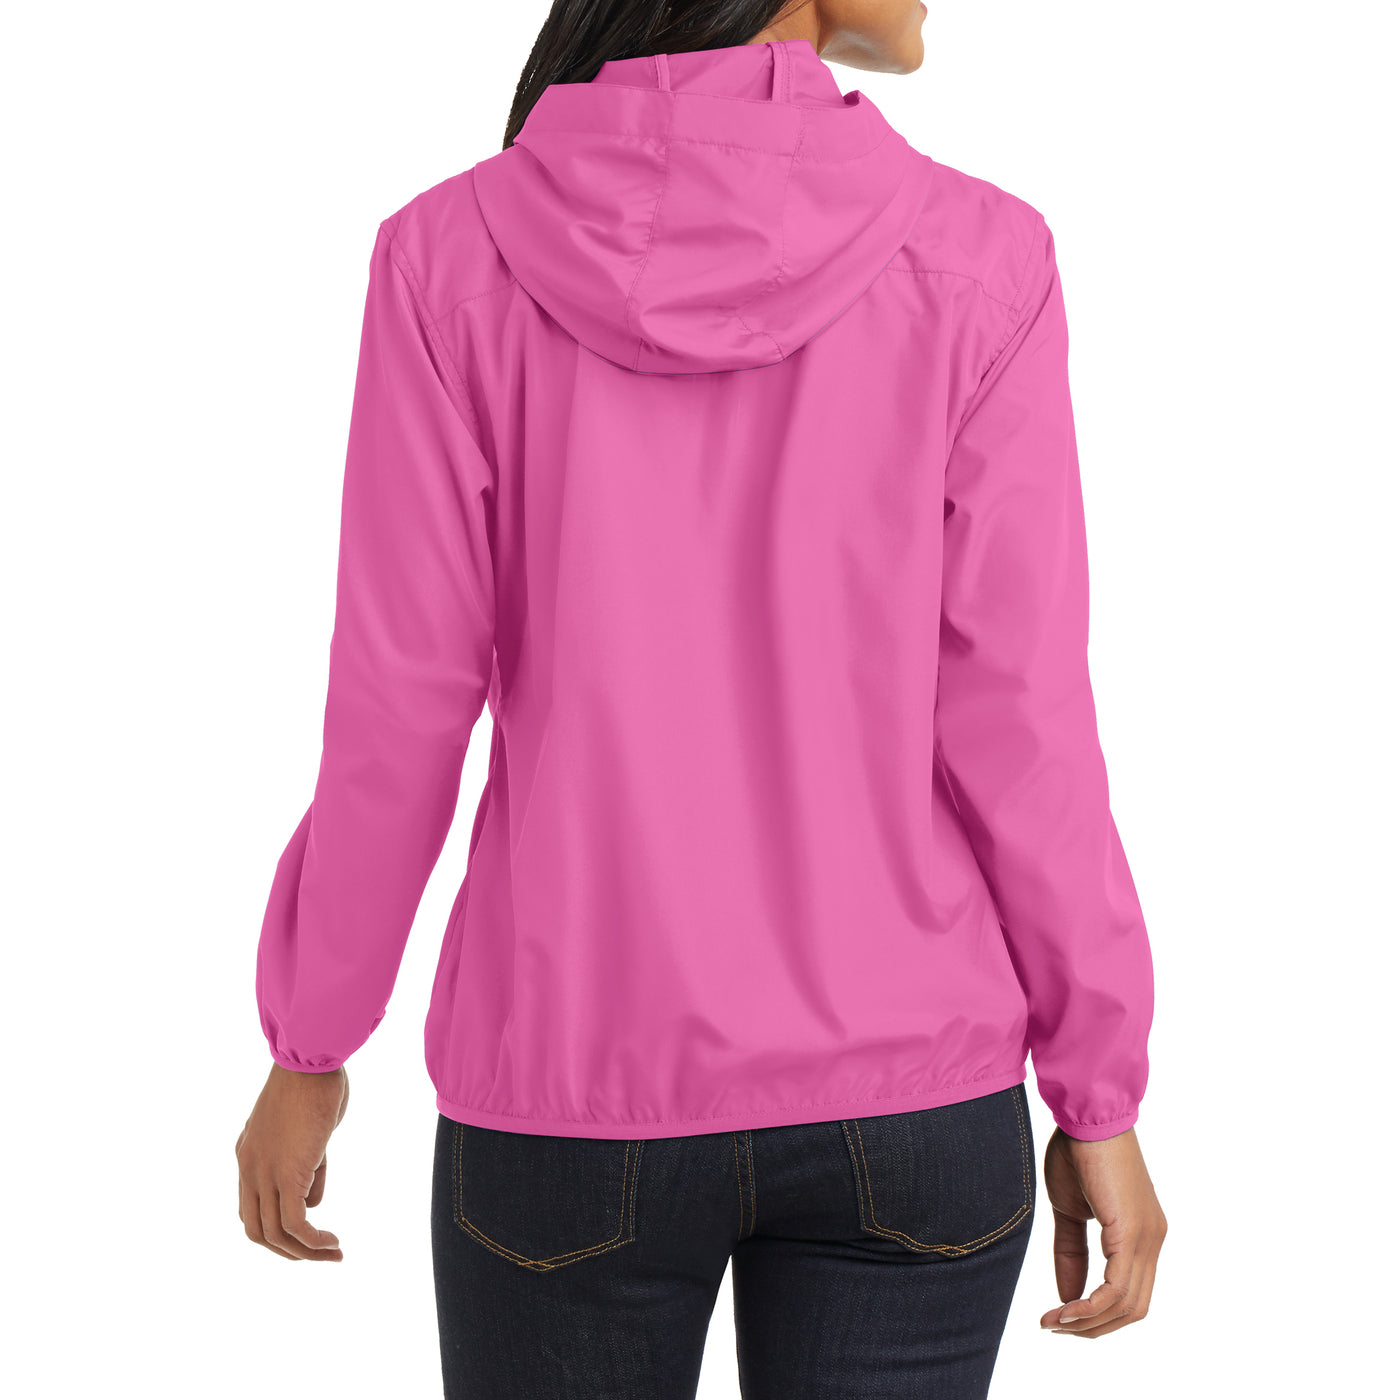 Women's Hooded Essential Jacket - Charity Pink - Back